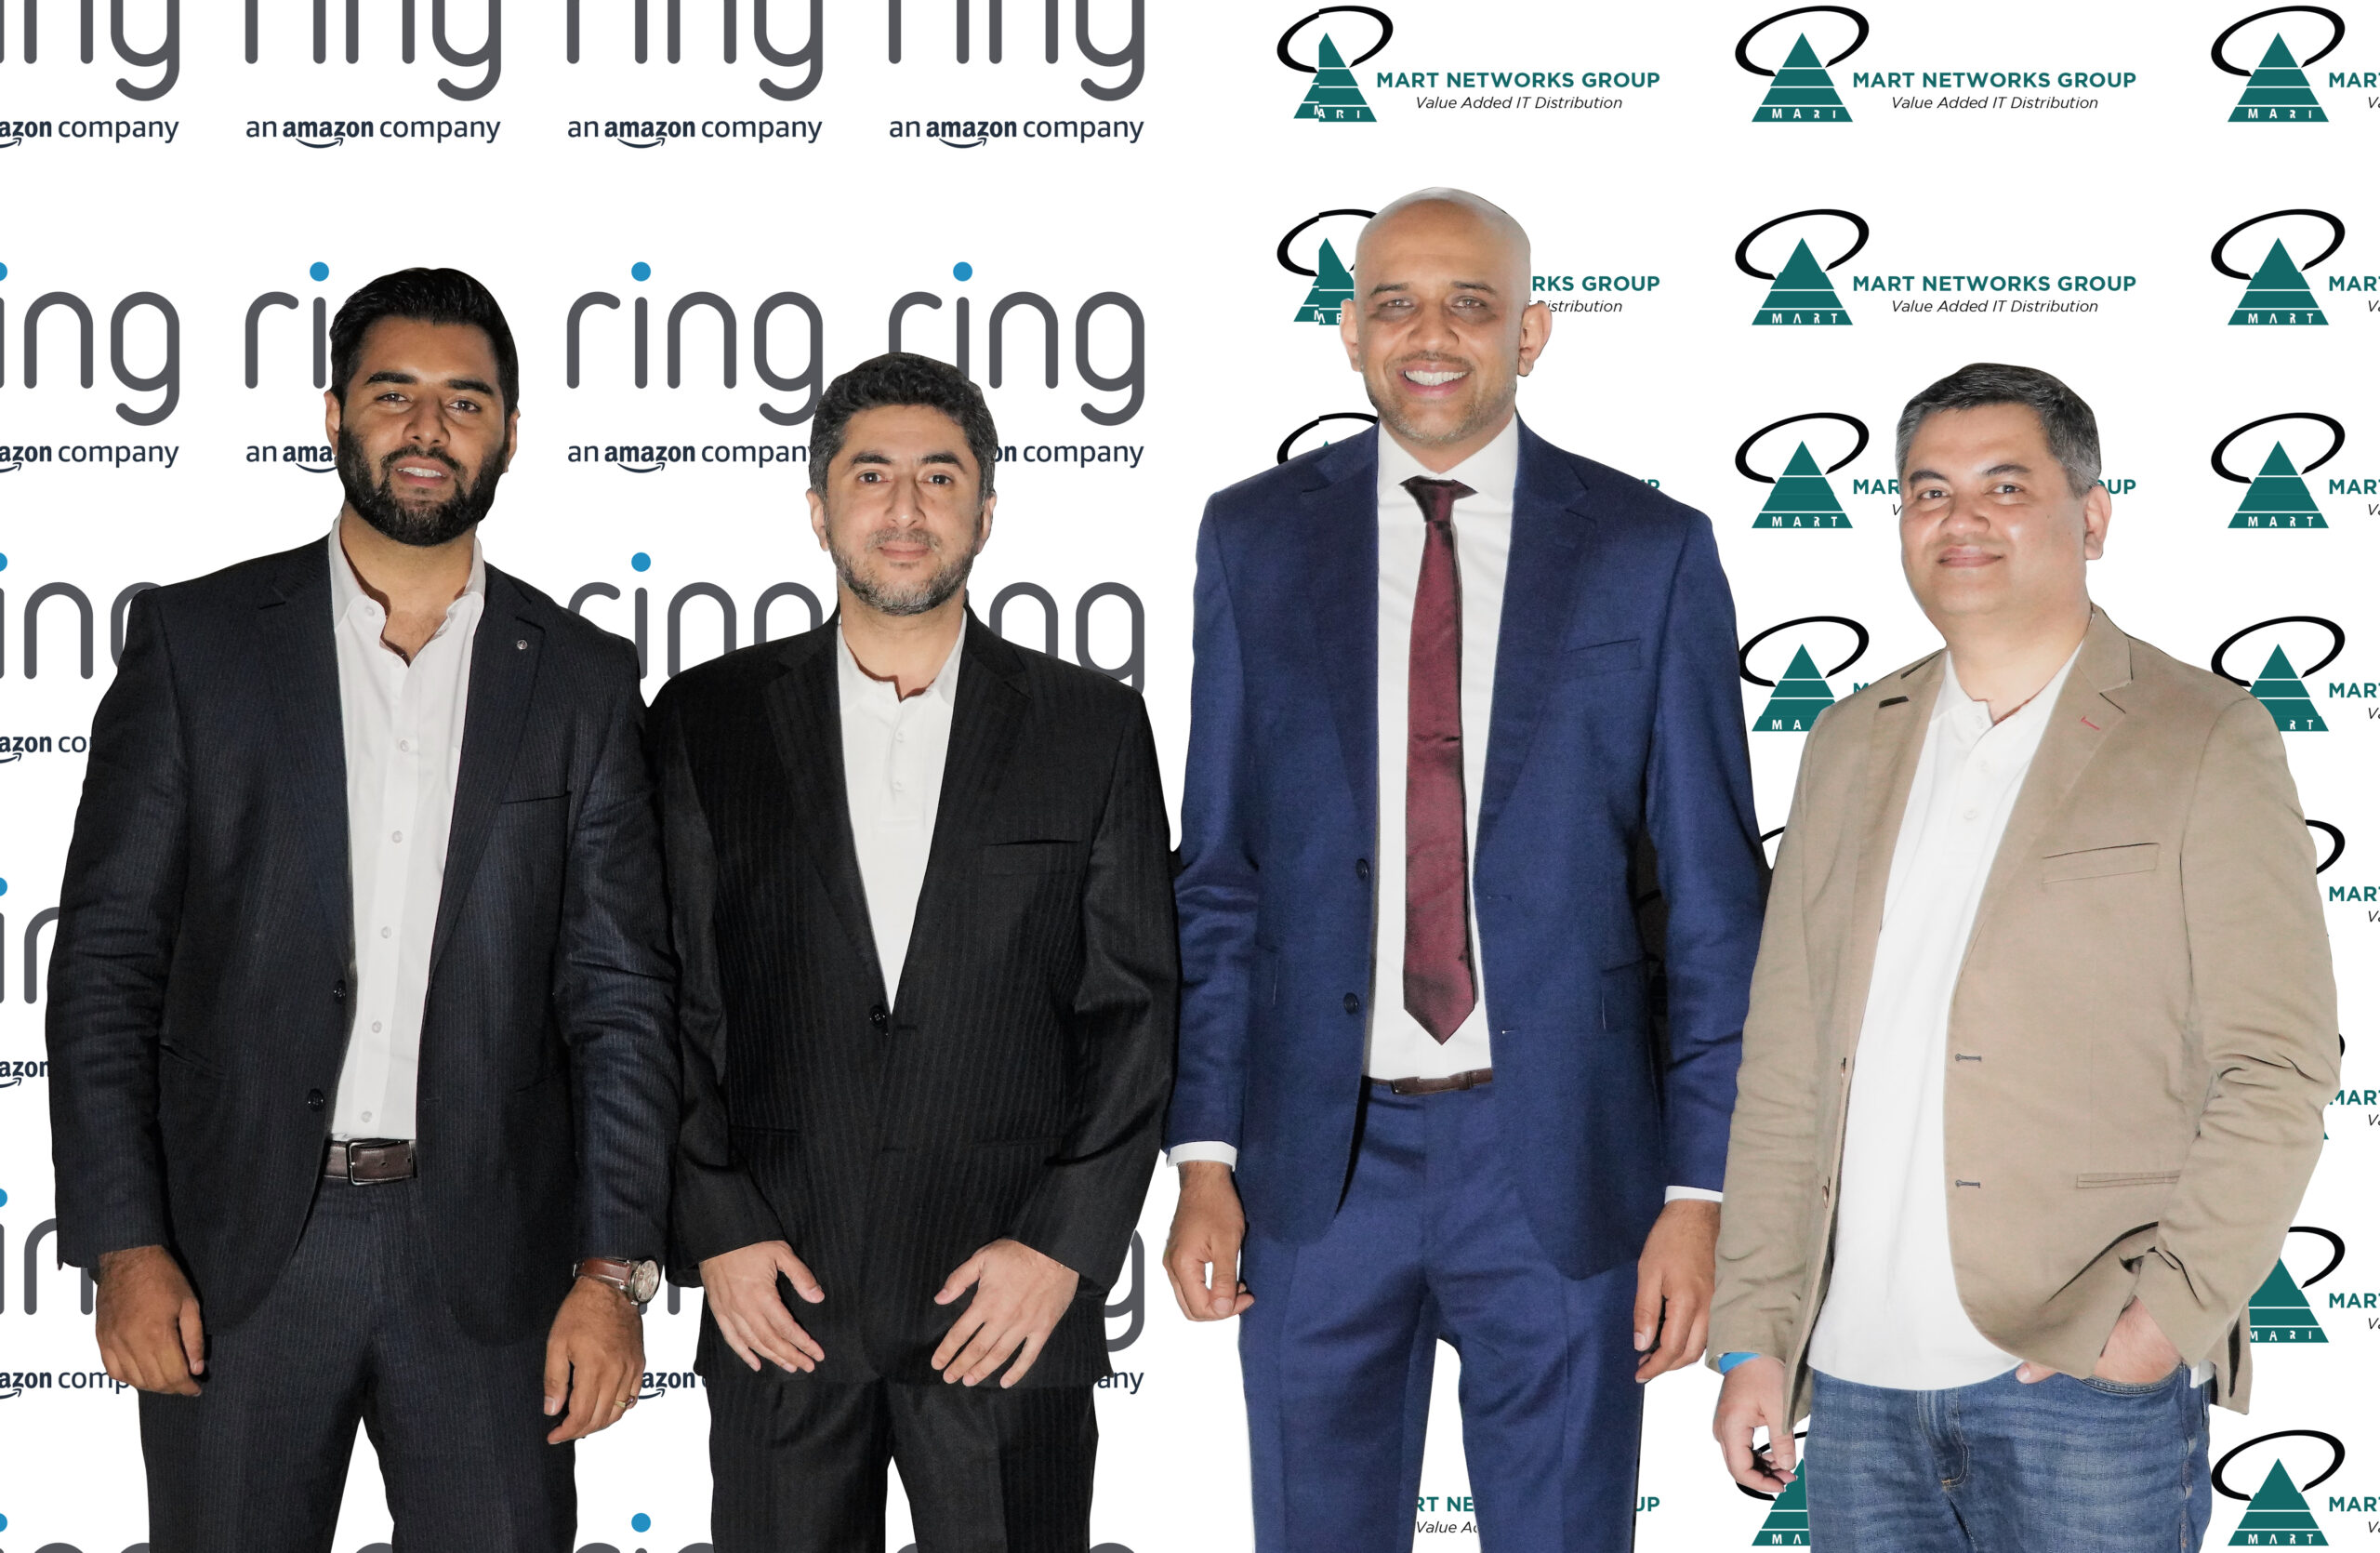 From Left to Right Saagar Panara Product Manager Ring at the Mart Networks Group, Nadeem Khanzadah, Sales Director Ring at Amazon for Emerging Markets, Moiz Maloo Managing Director Mart Networks Group, Nav Borah Senior Business Development Manager for Global Partnerships at Ring an Amazon Company.